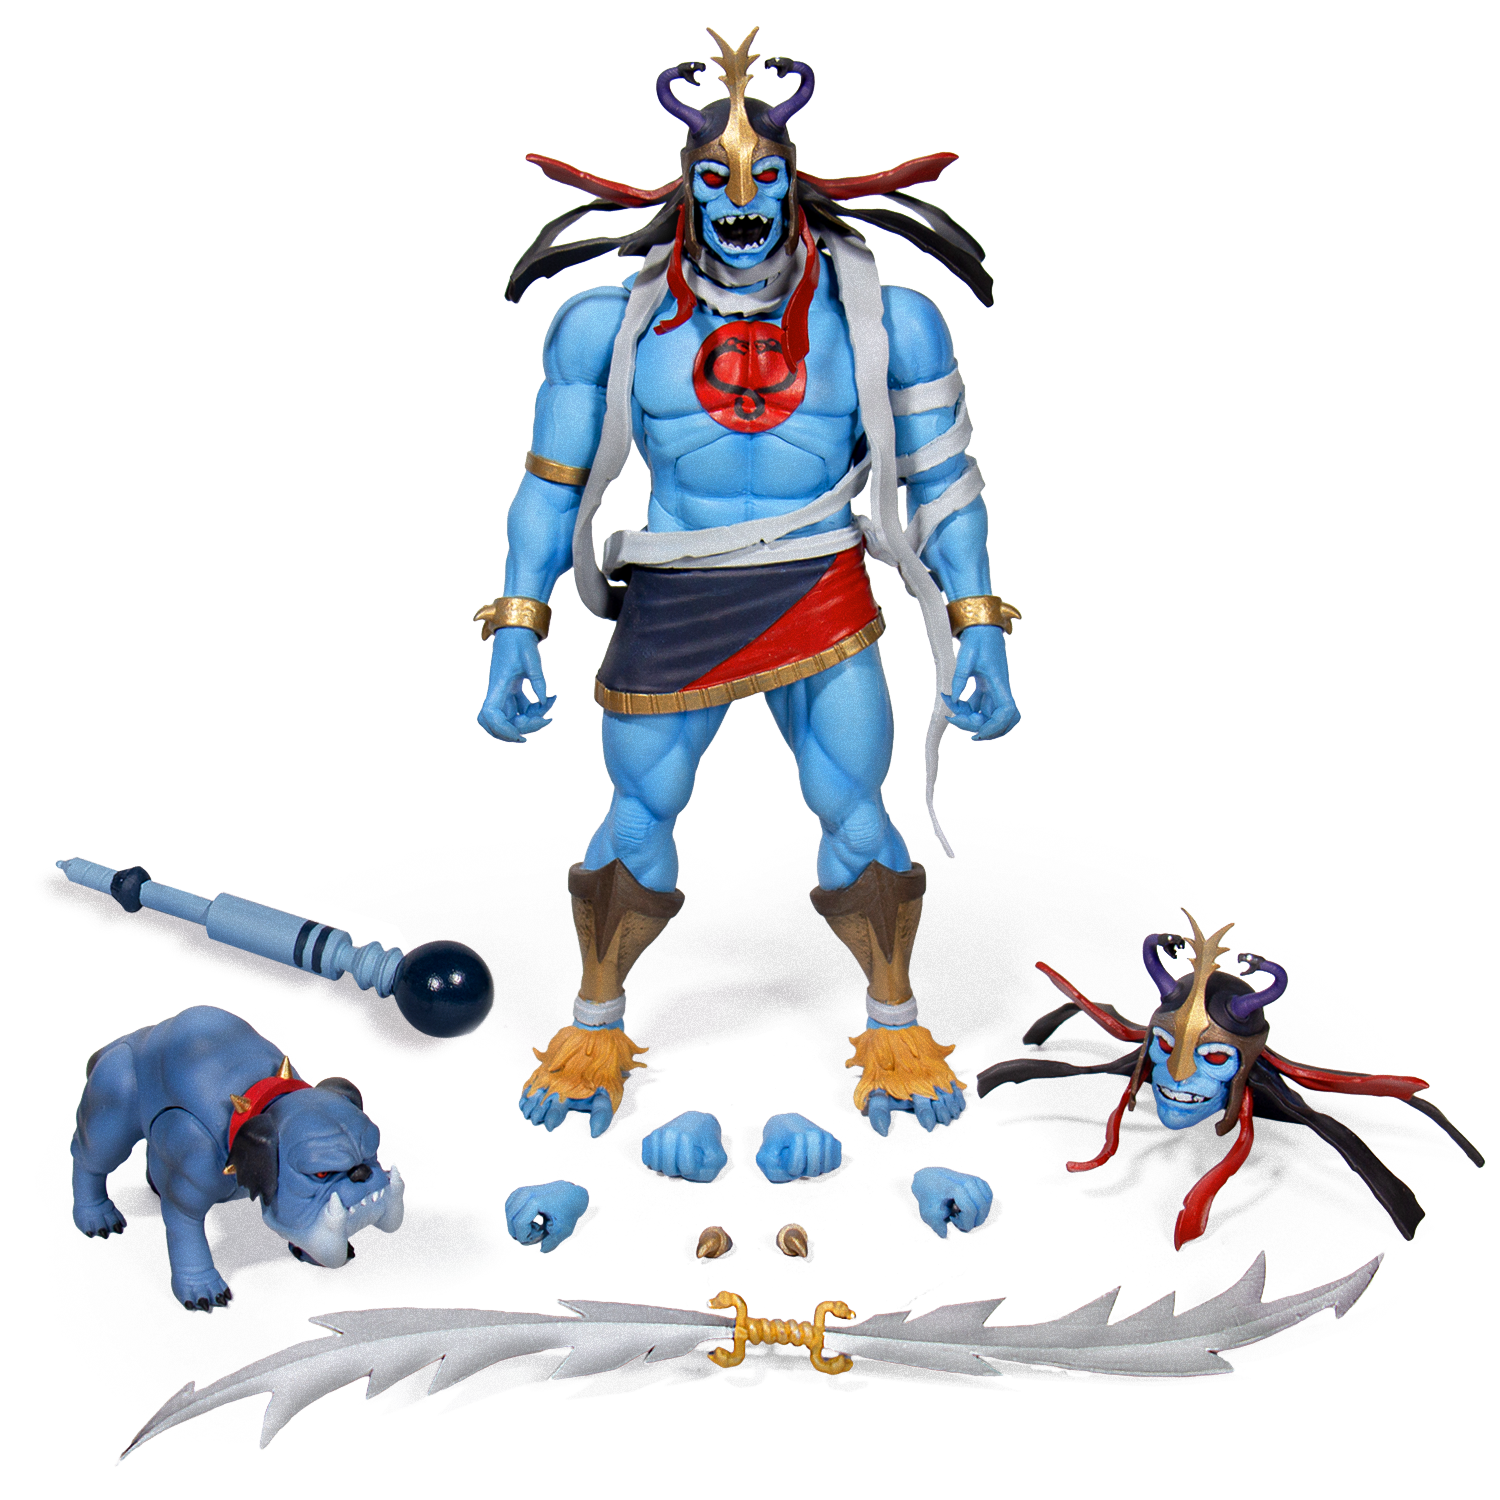 ThunderCats ULTIMATES! Figure Wave 2 - Mumm-Ra the Ever-Living with Ma-Mutt 2-Pack